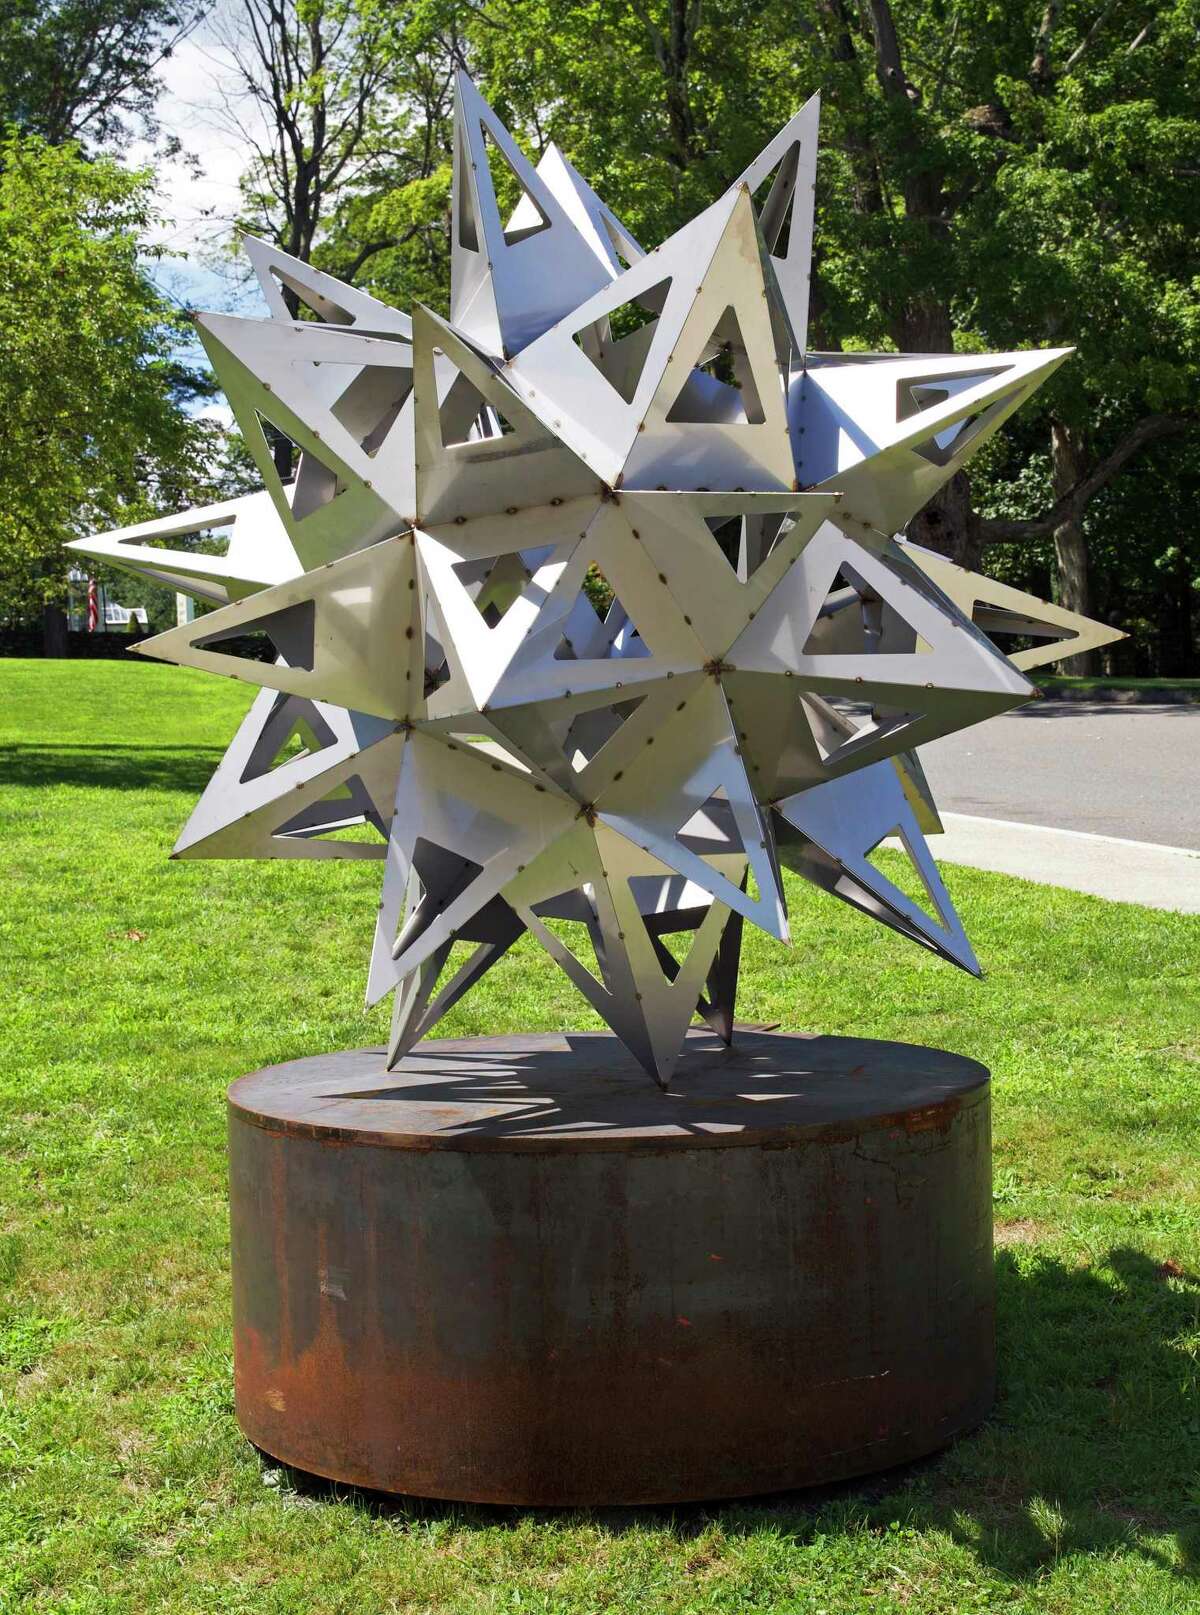 The exhibit “Frank Stella’s Stars, A Survey” at the Aldrich Contemporary Art Museum showcases artwork such as “Jay’s Star.” The show also includes paintings, wall reliefs and painted objects.